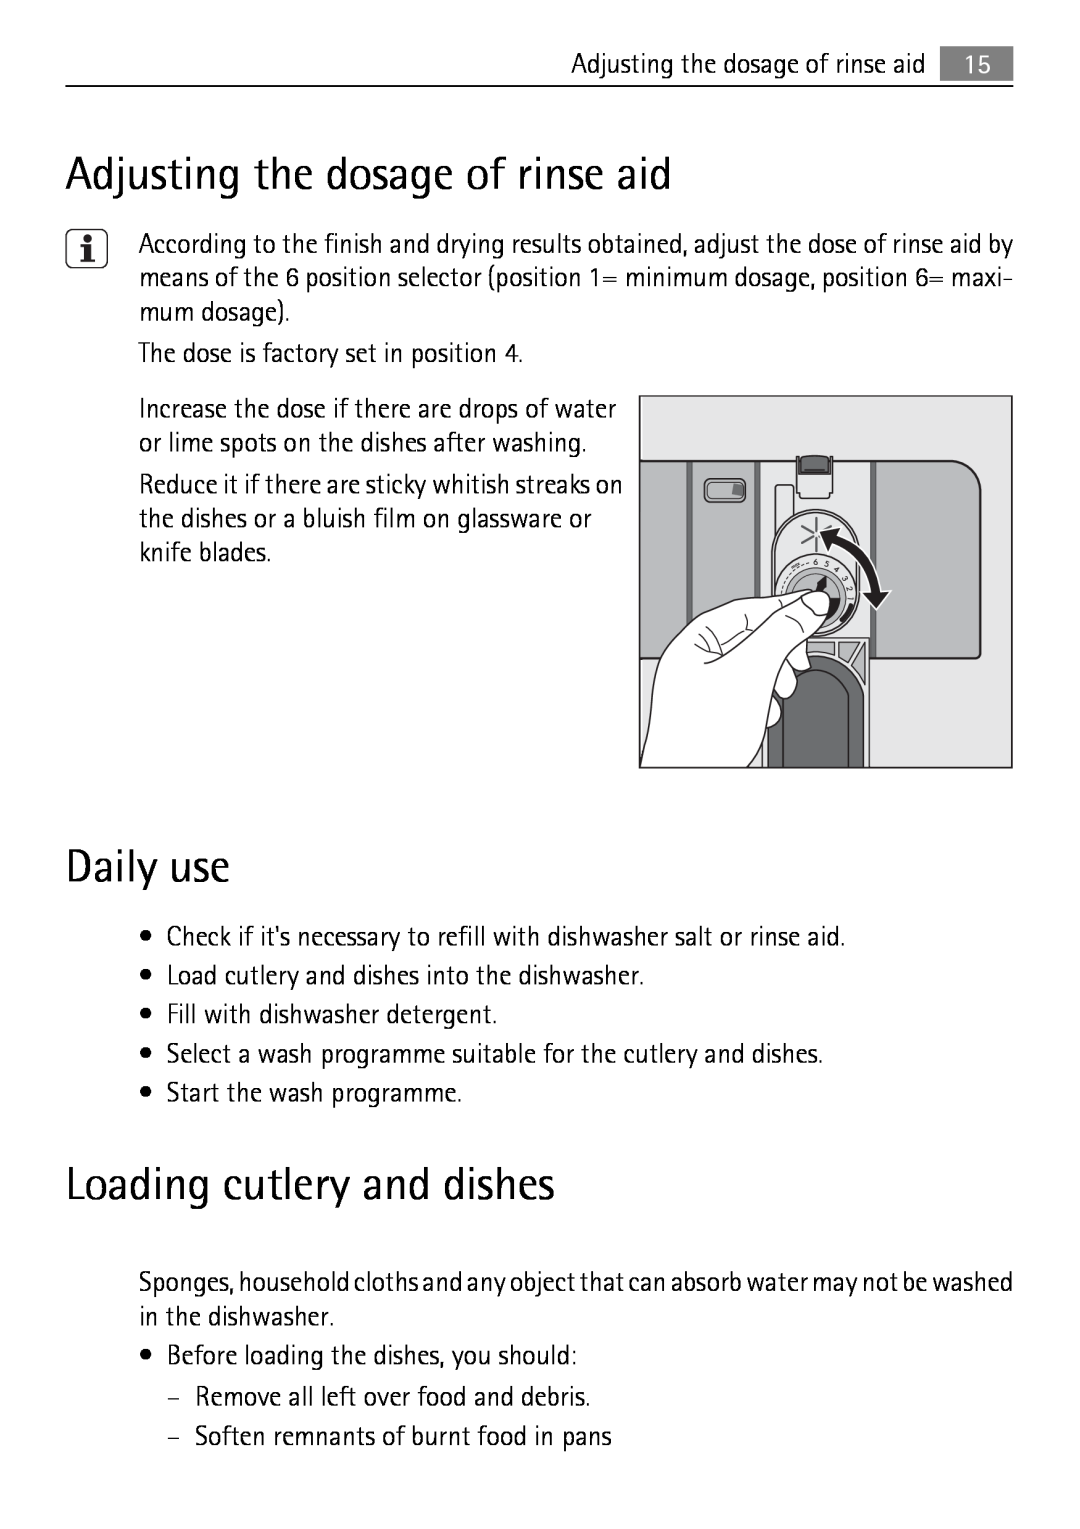 Electrolux 50870 user manual Adjusting the dosage of rinse aid, Daily use, Loading cutlery and dishes 